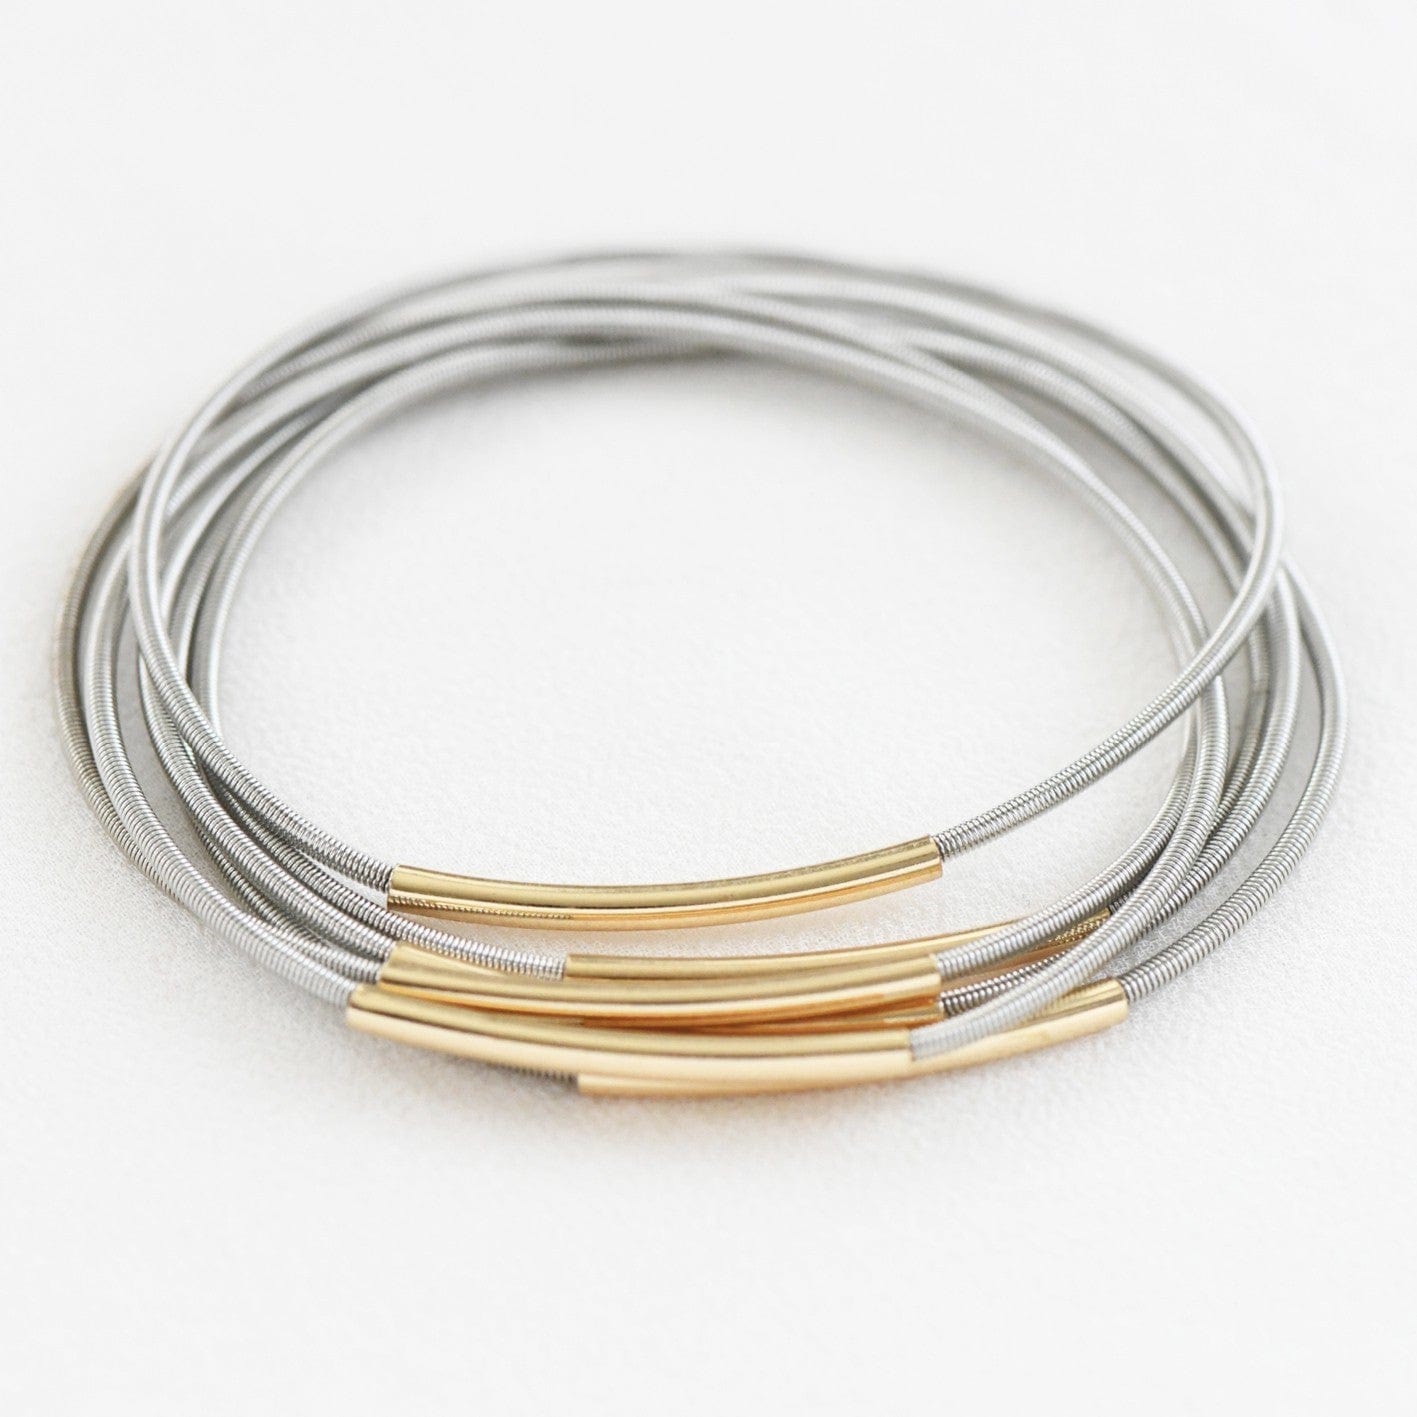 Stretchy Layered Guitar String Bracelet Set In Silver - Infinity Raine